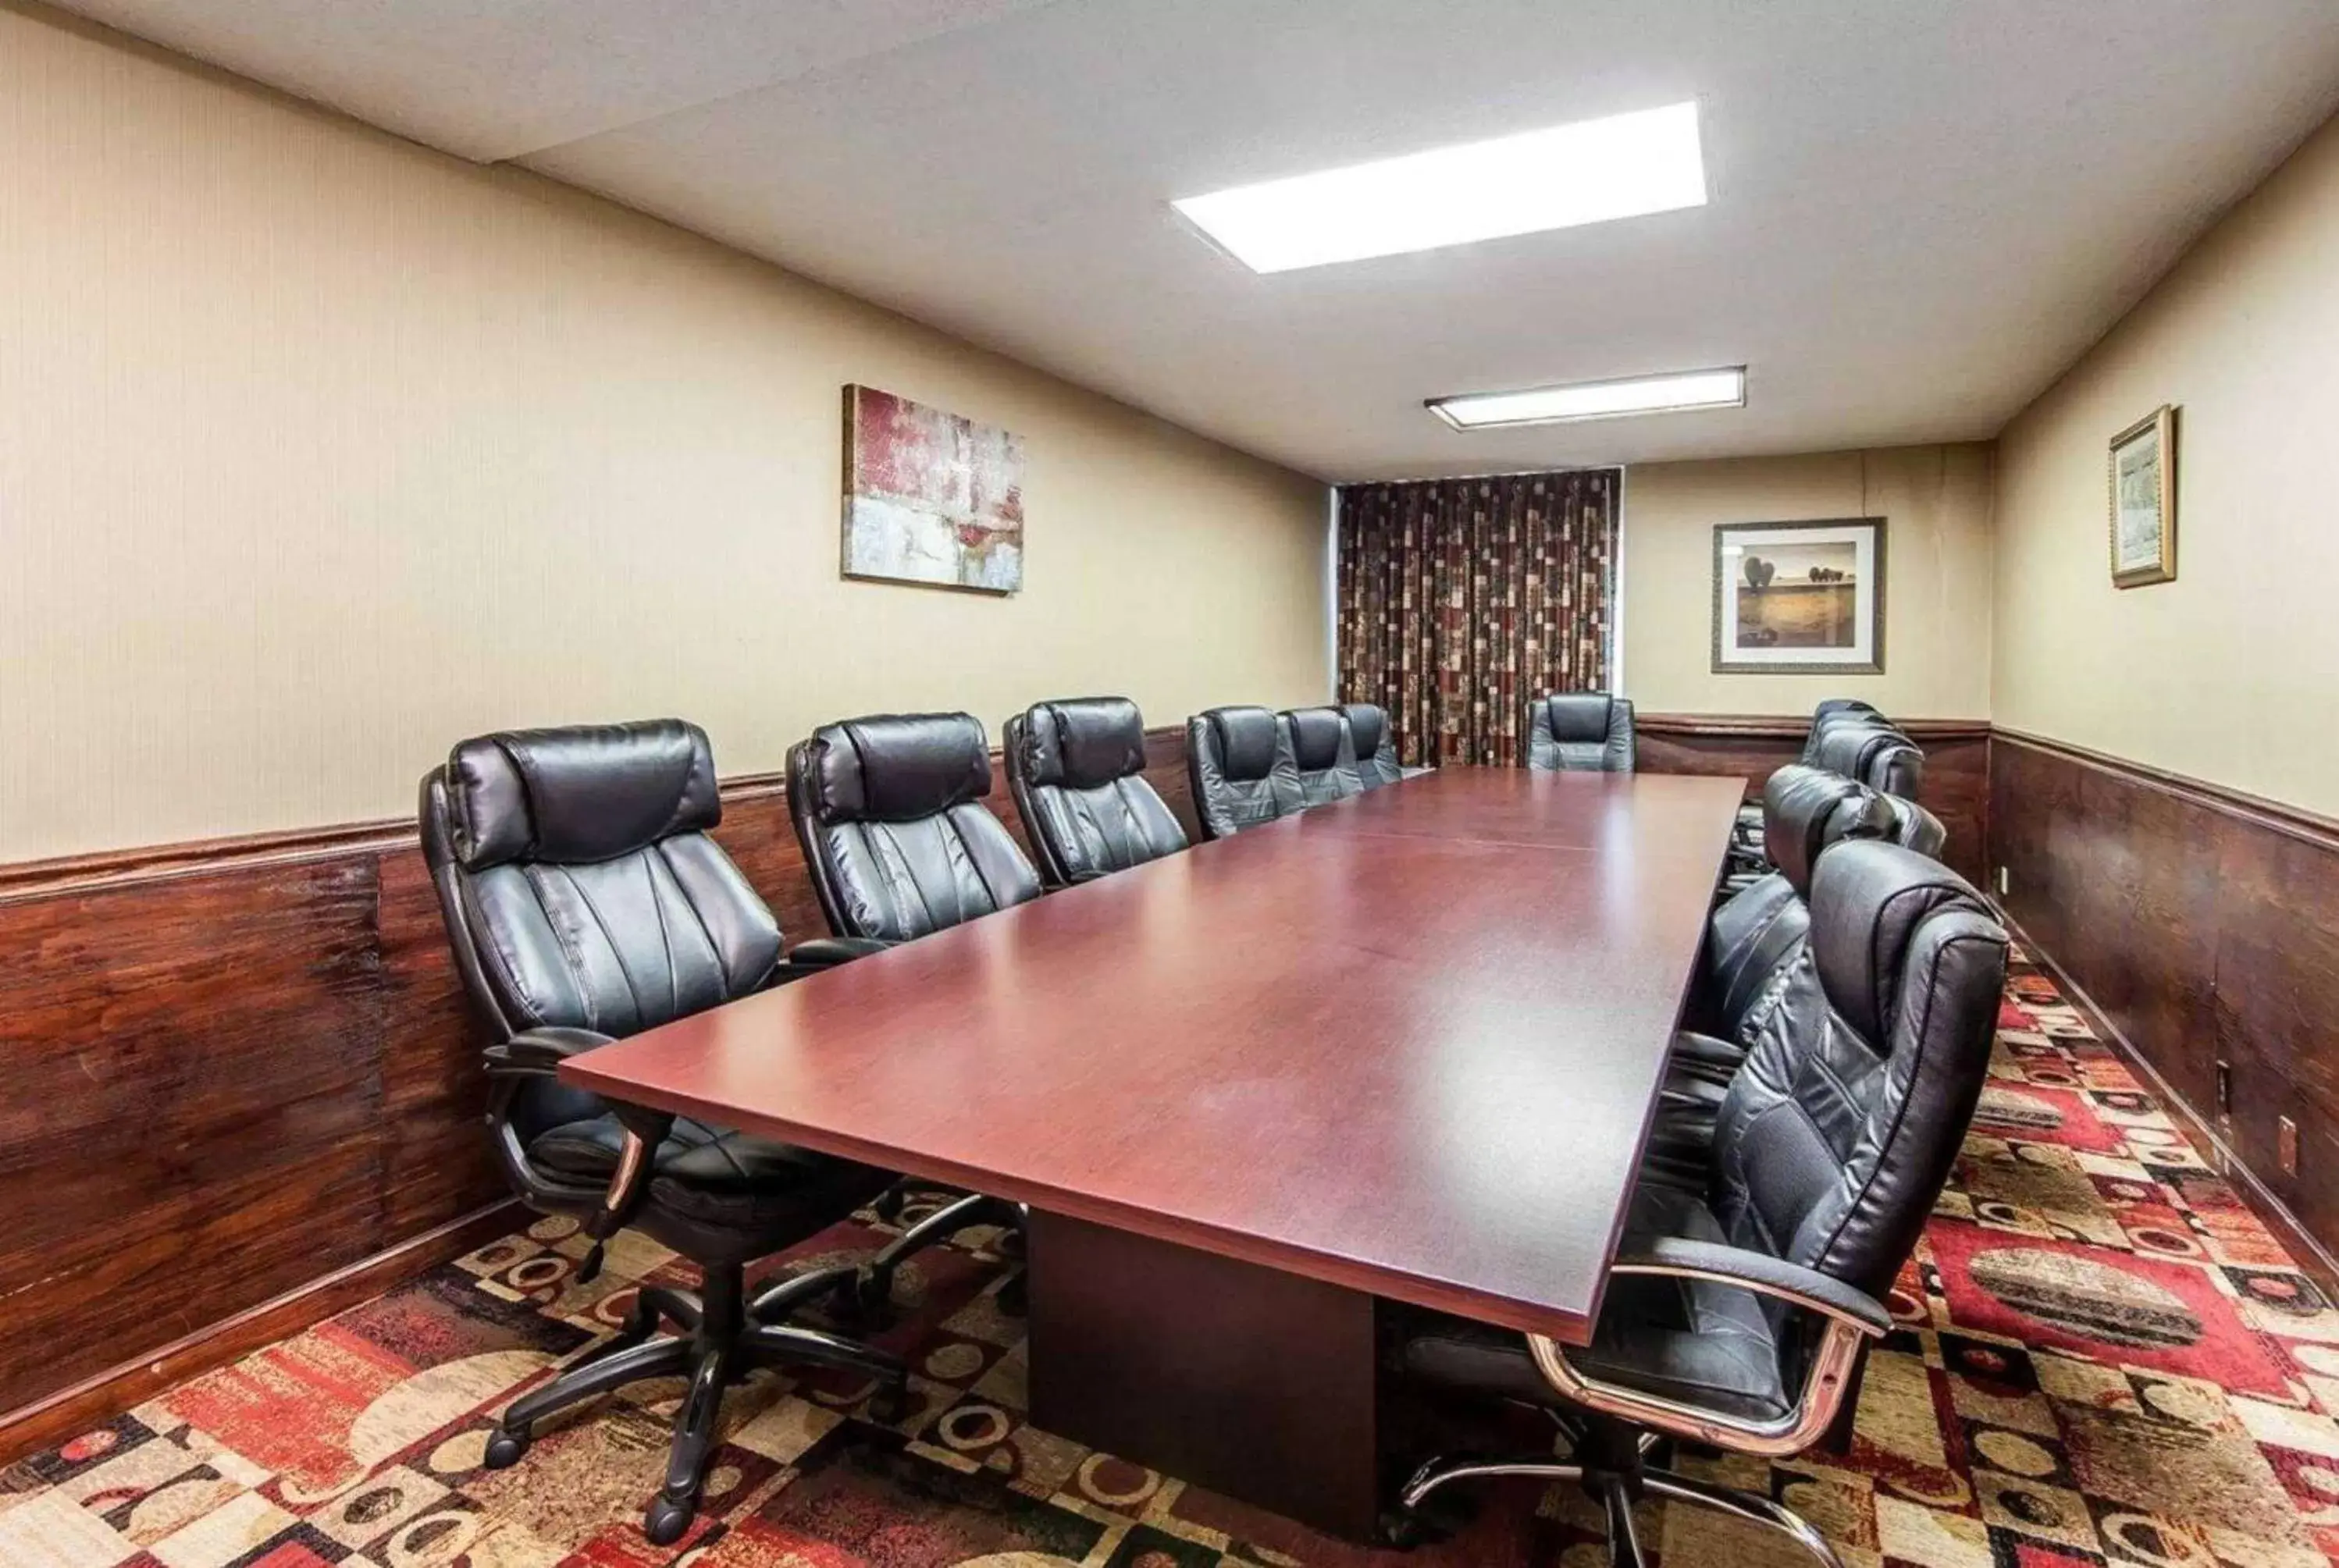 Meeting/conference room in Wingate by Wyndham Marietta Conference Center Ohio